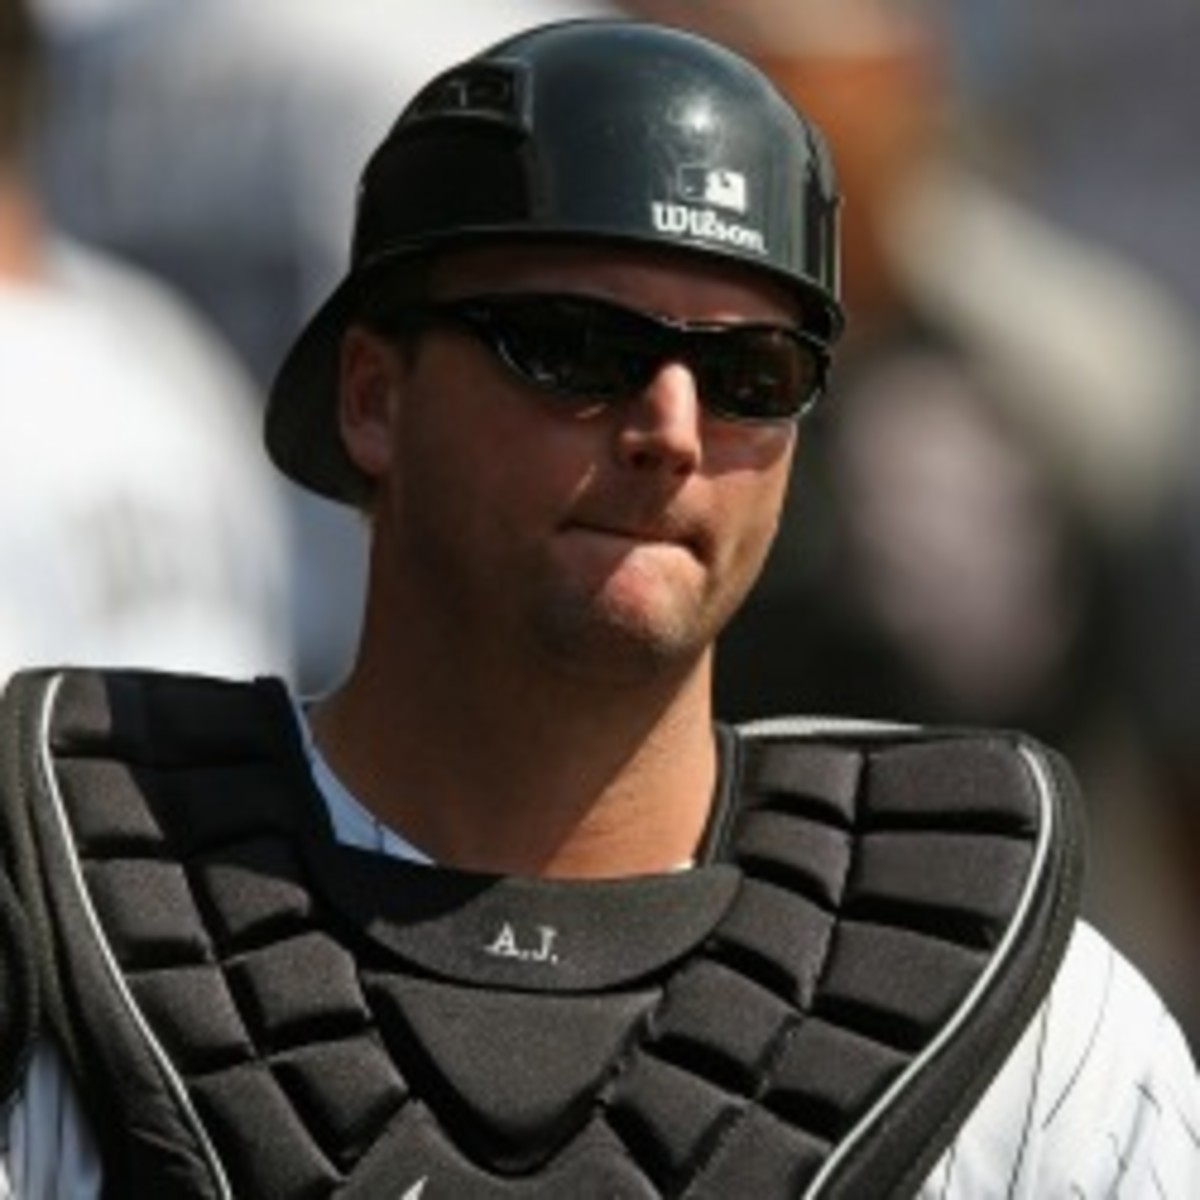 Catcher A.J. Pierzynski criticized Rangers manager Ron Washington last July for not selecting him as an All-Star. (Jonathan Daniel/Getty Images)